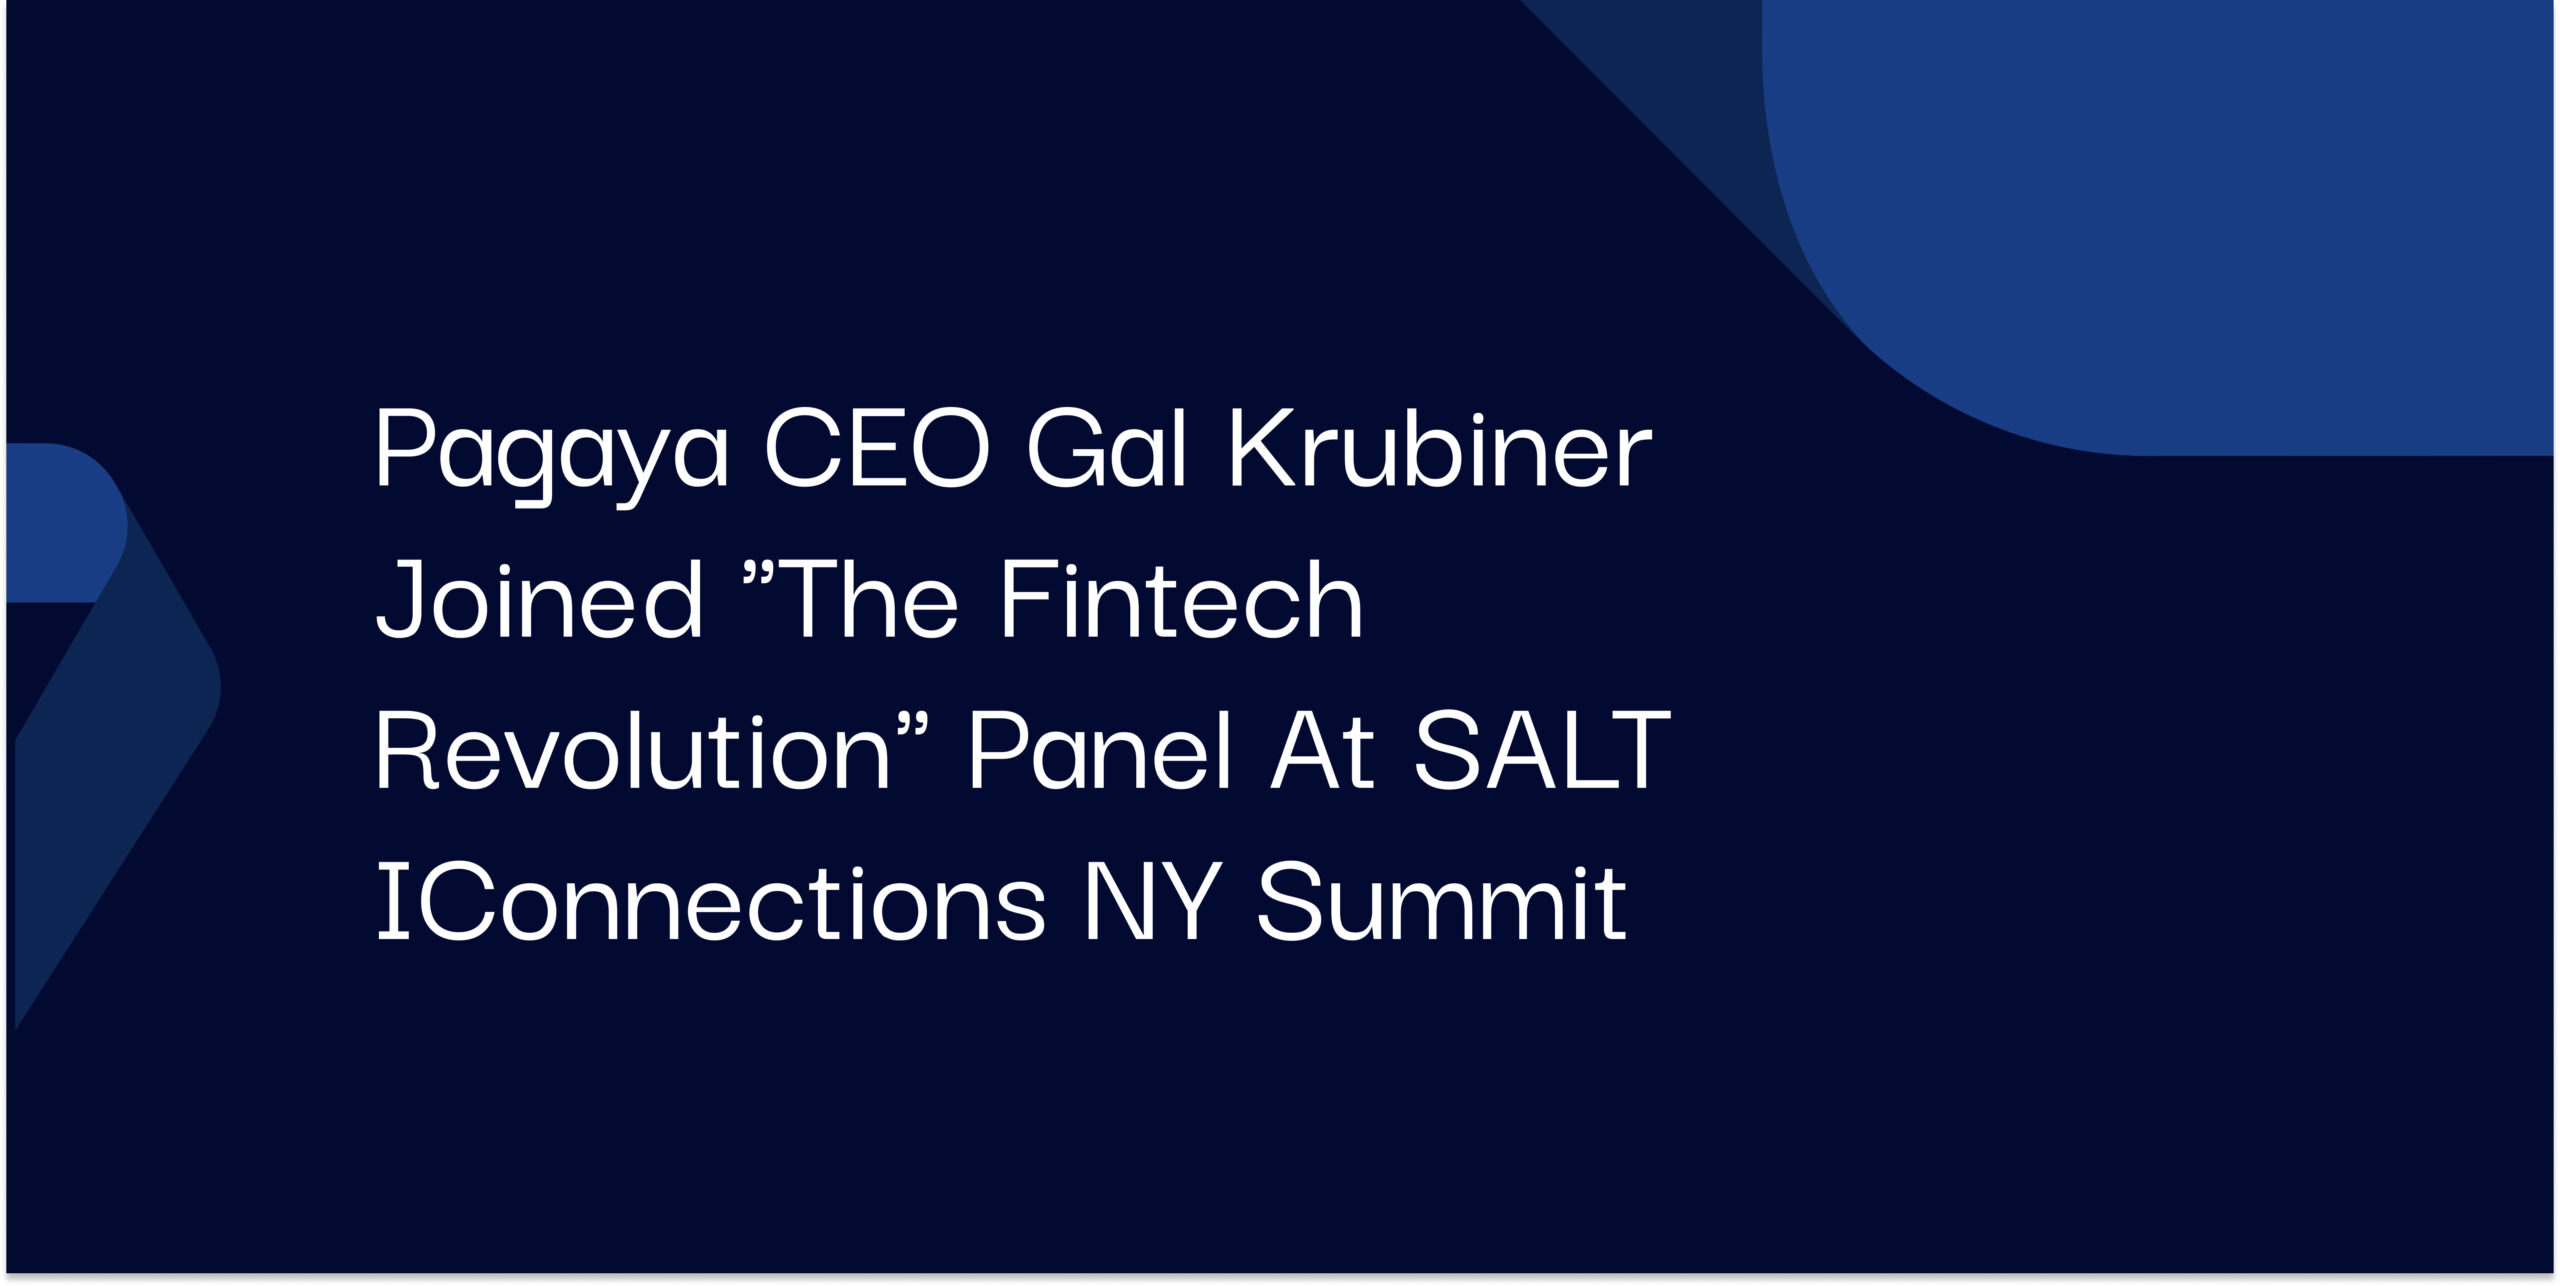 Pagaya CEO Gal Krubiner joined The Fintech Revolution panel at SALT iConnections NY Summit